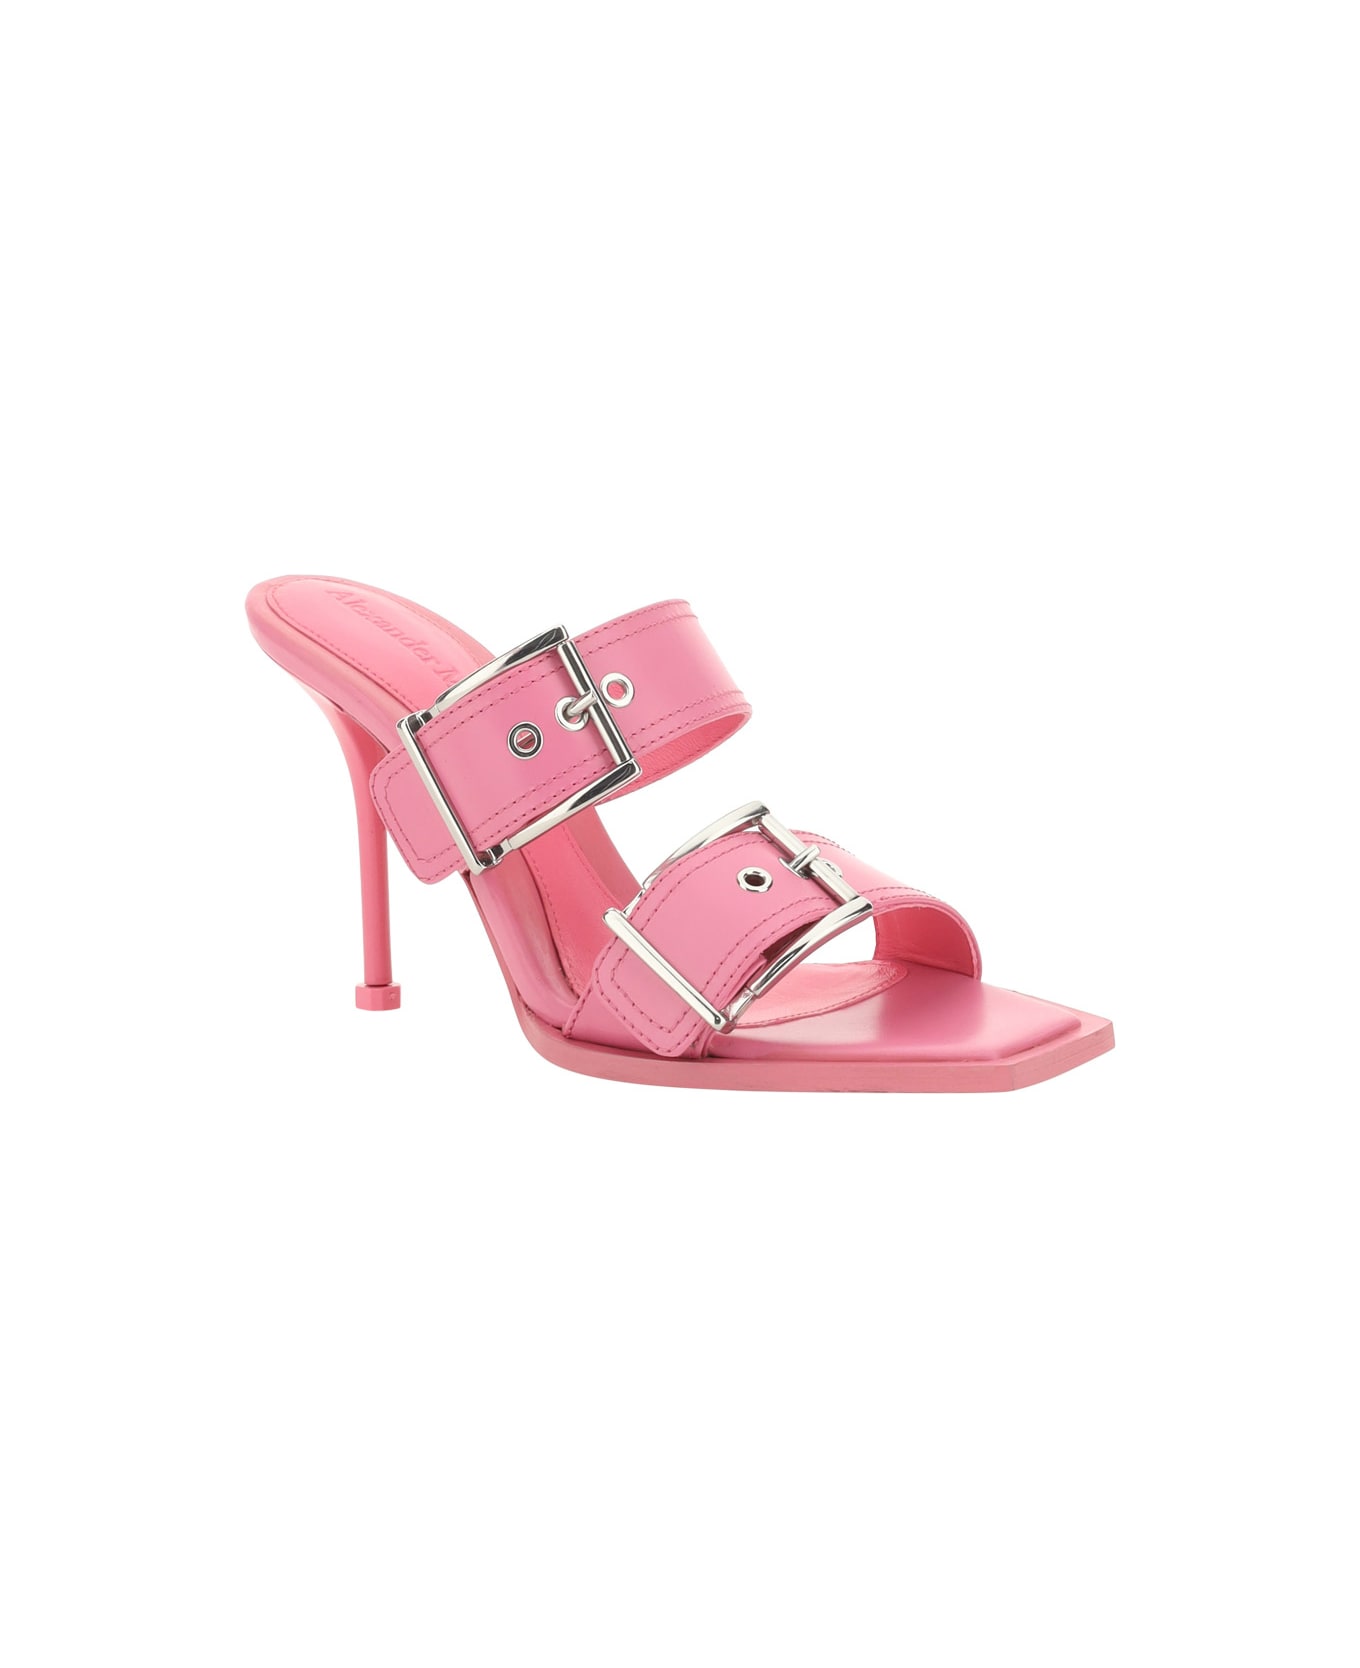 Alexander McQueen Leather Mules - Sugar Pink/silver